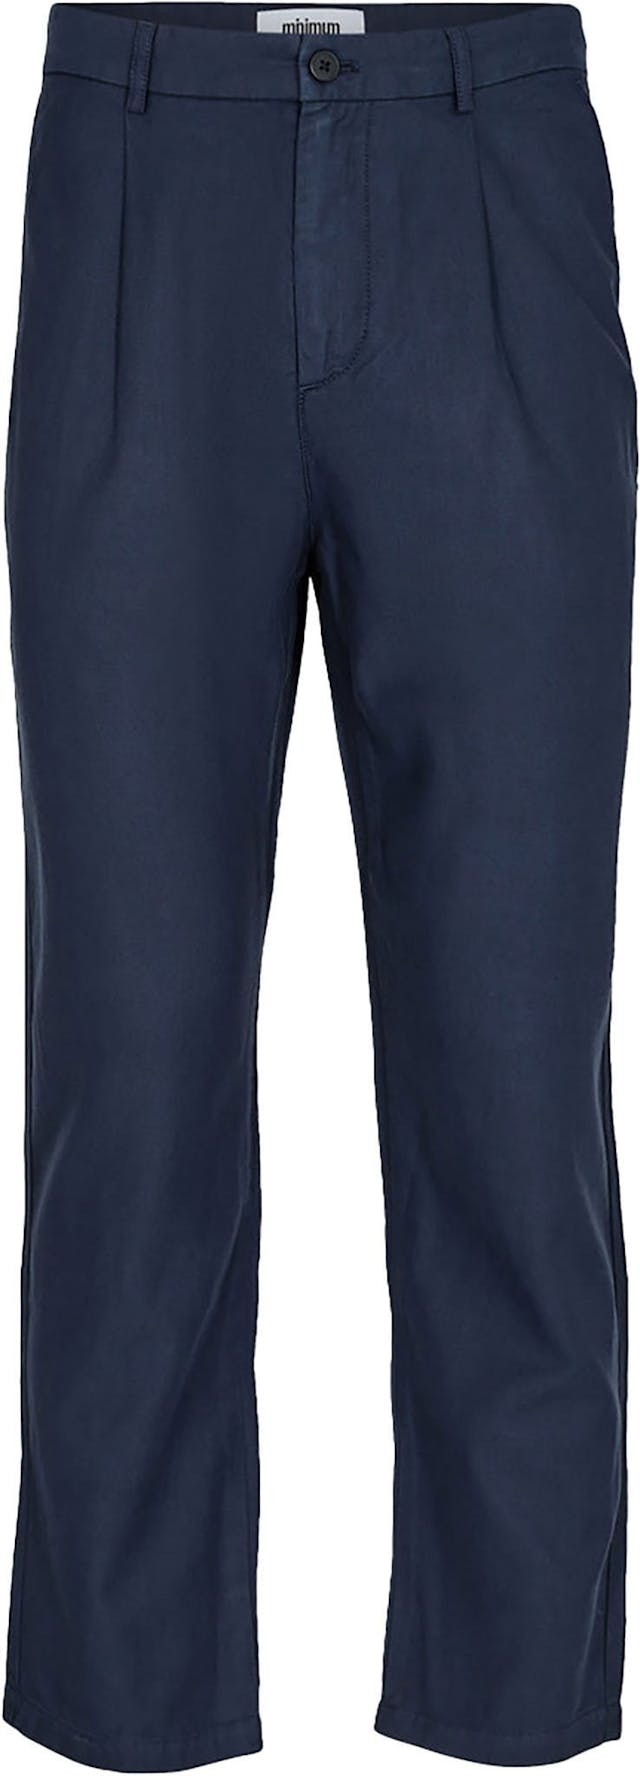 Product image for Frode Casual Pants - Men's